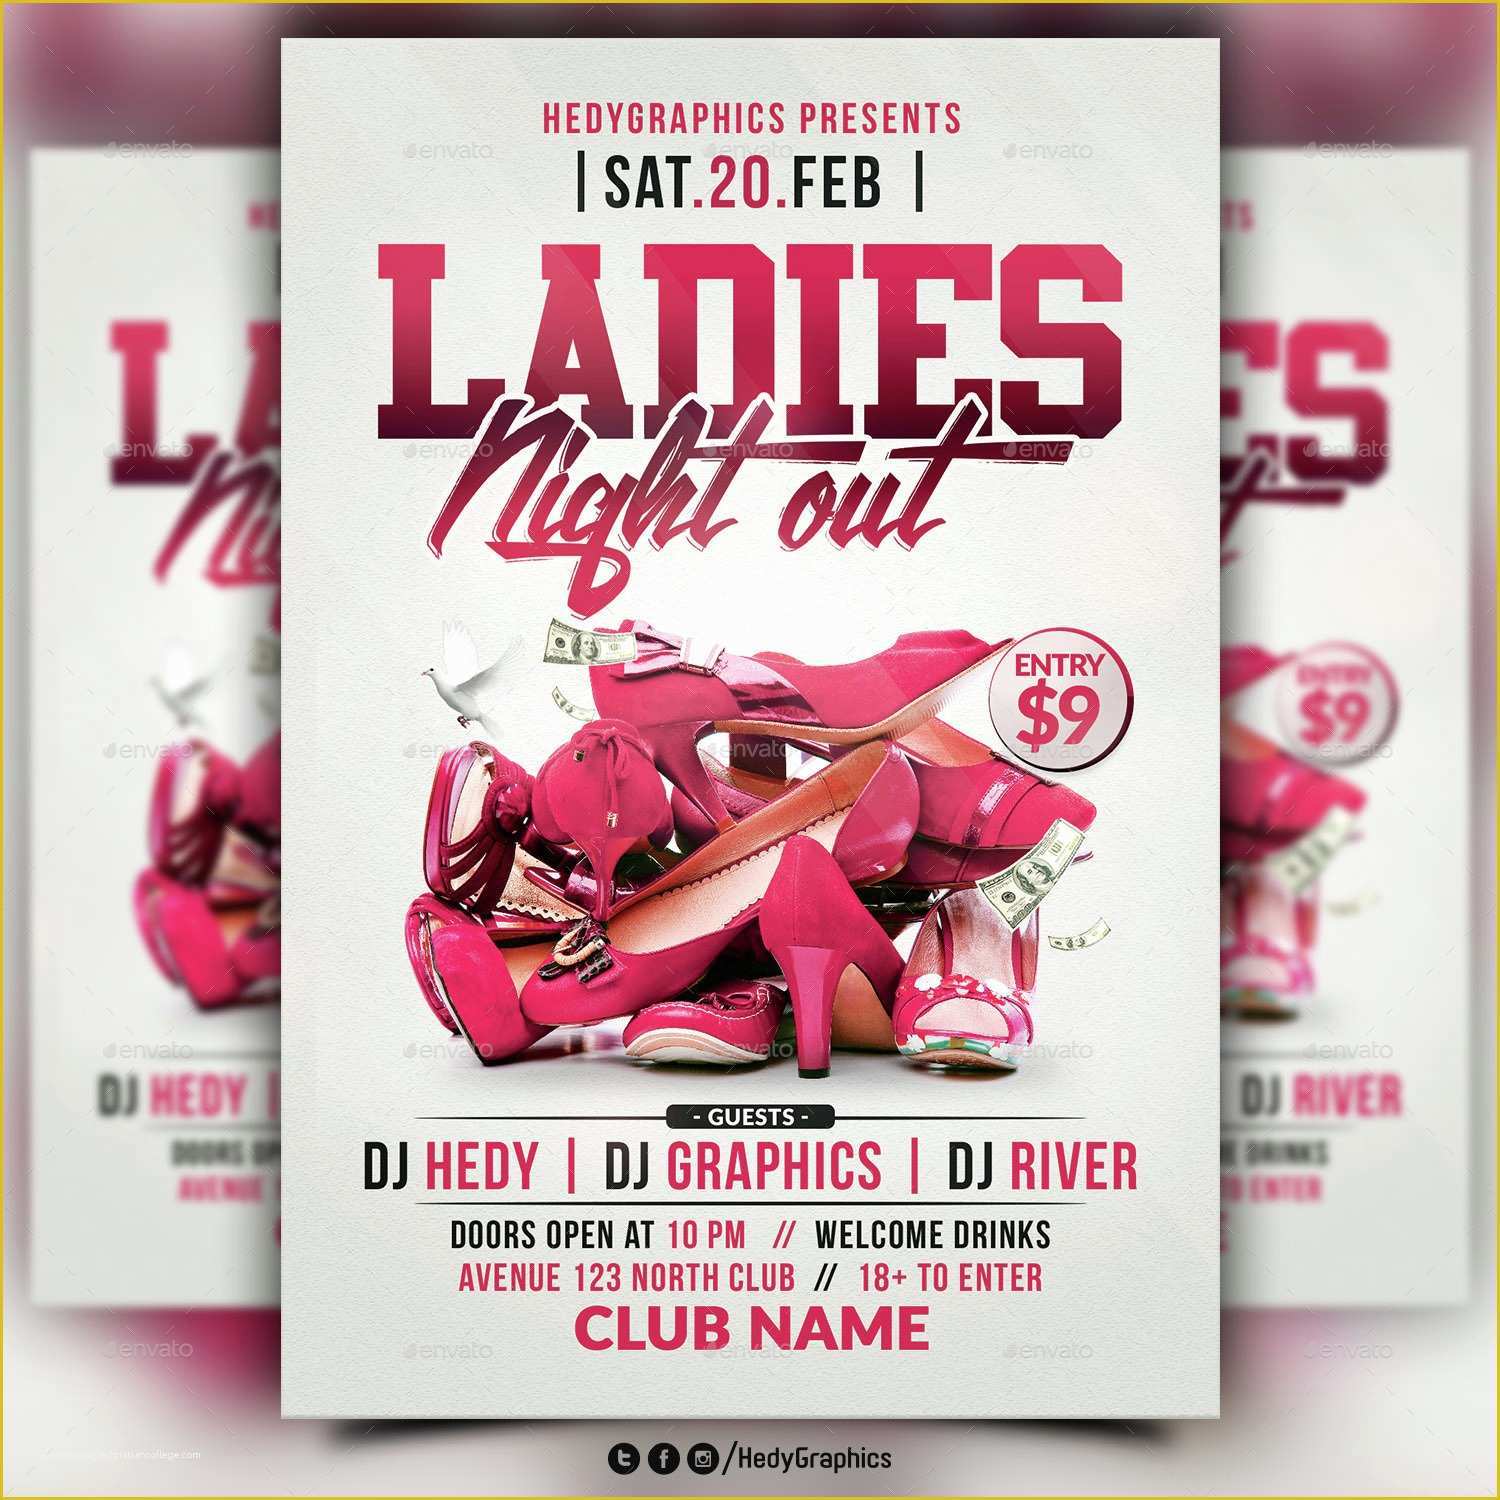 Ladies Night Out Flyer Template Free Of La S Night Out Flyer Template by Hedygraphics